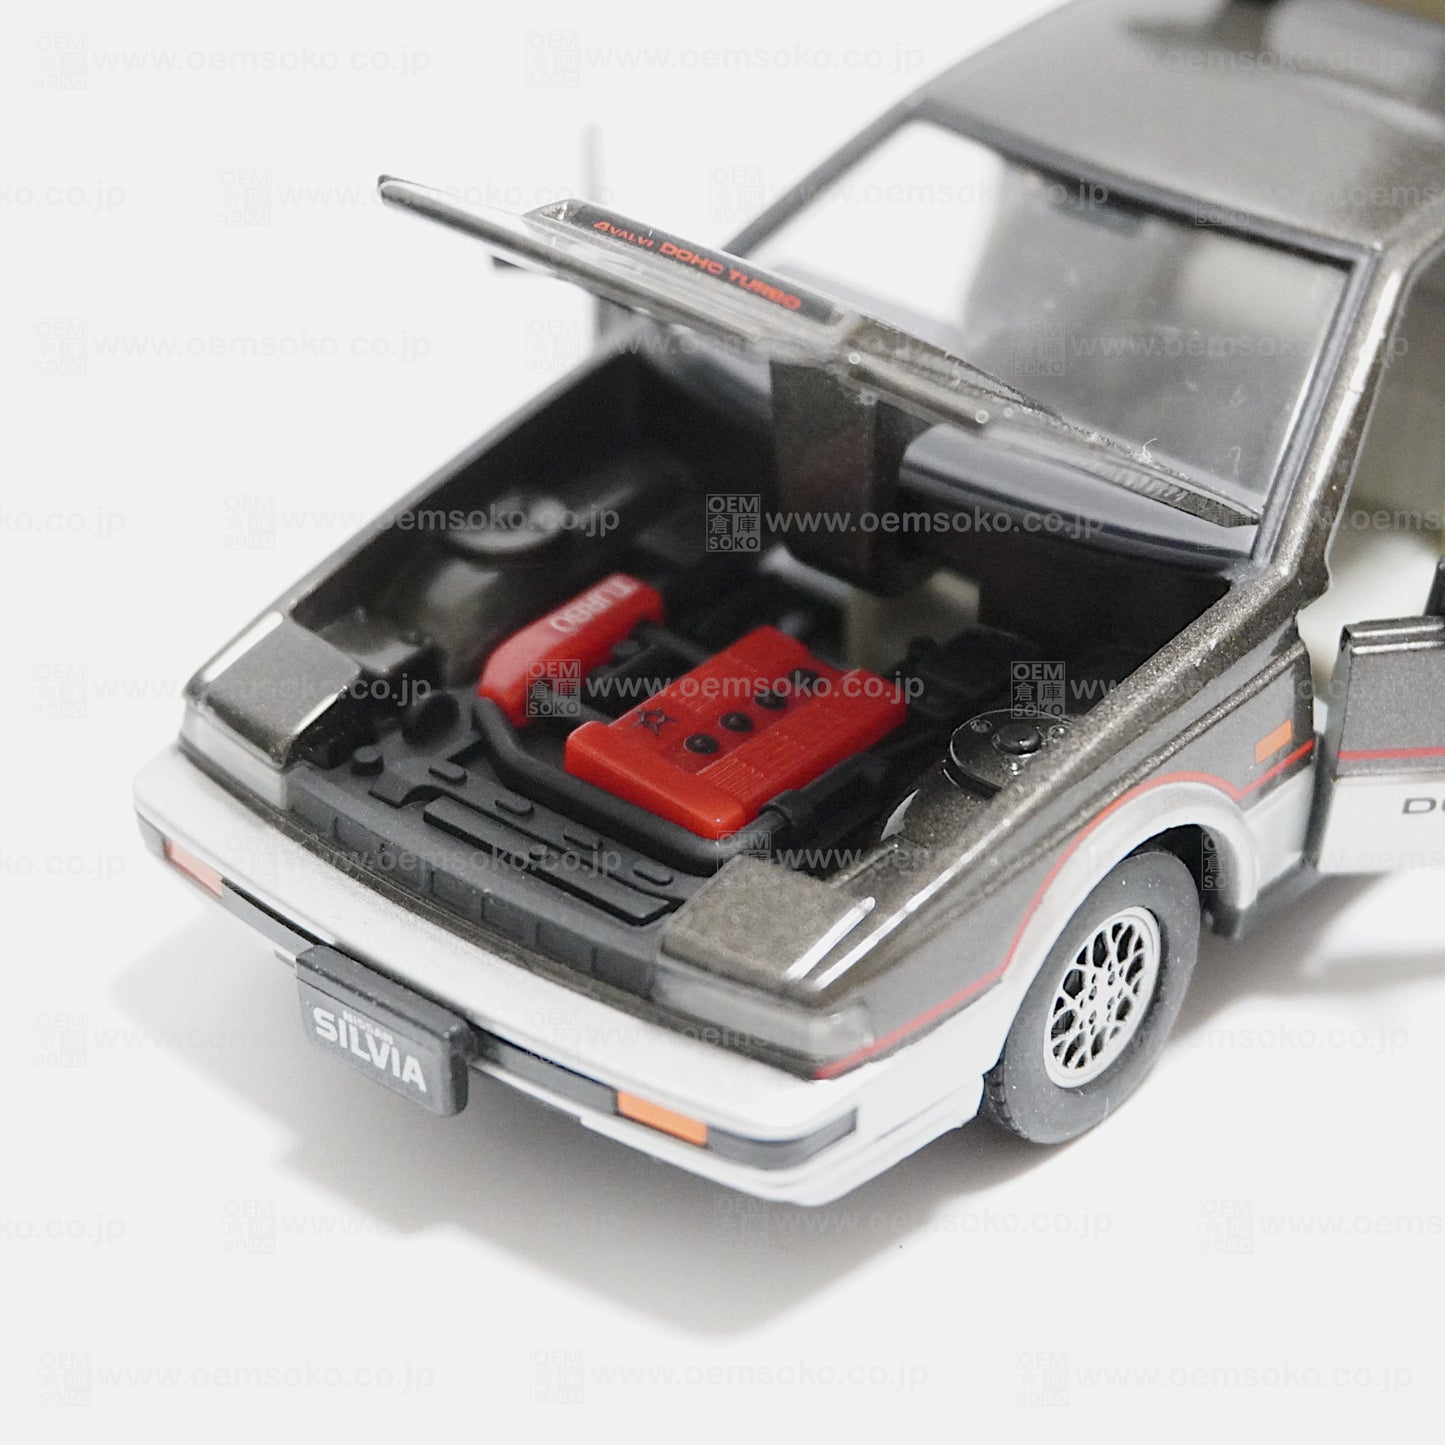 *Rare* - Tomy "Tomica Limited S Series" No. 0004 Nissan Silvia Turbo RS-X